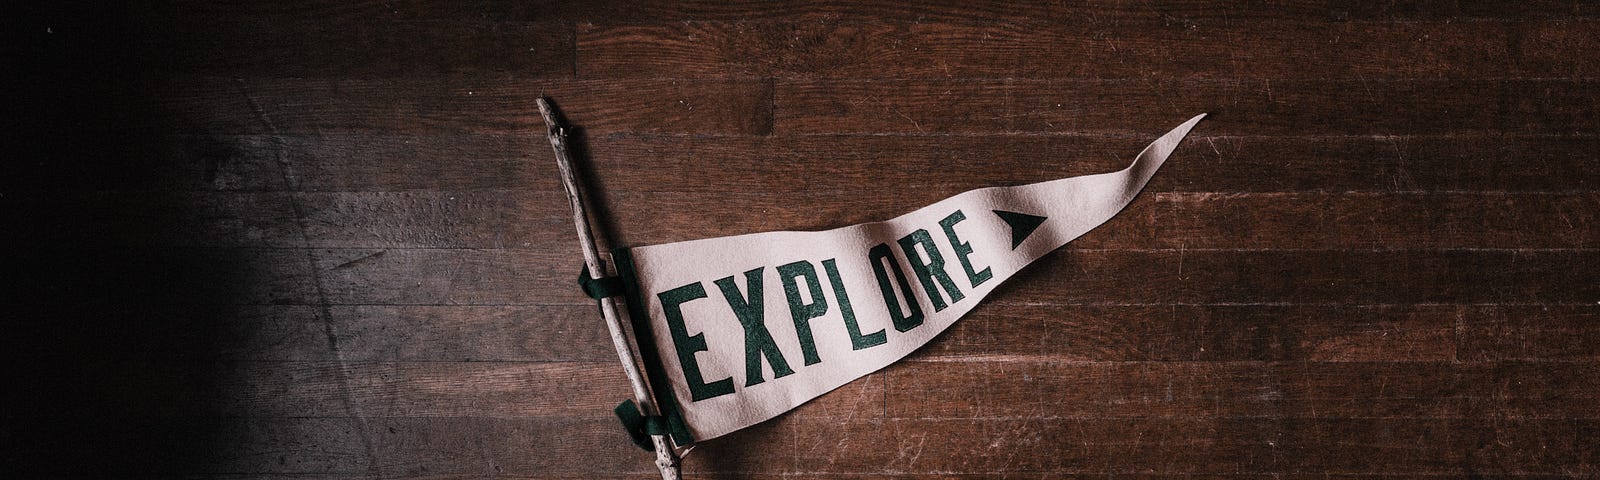 A flag with the word ‘explore’ on it.